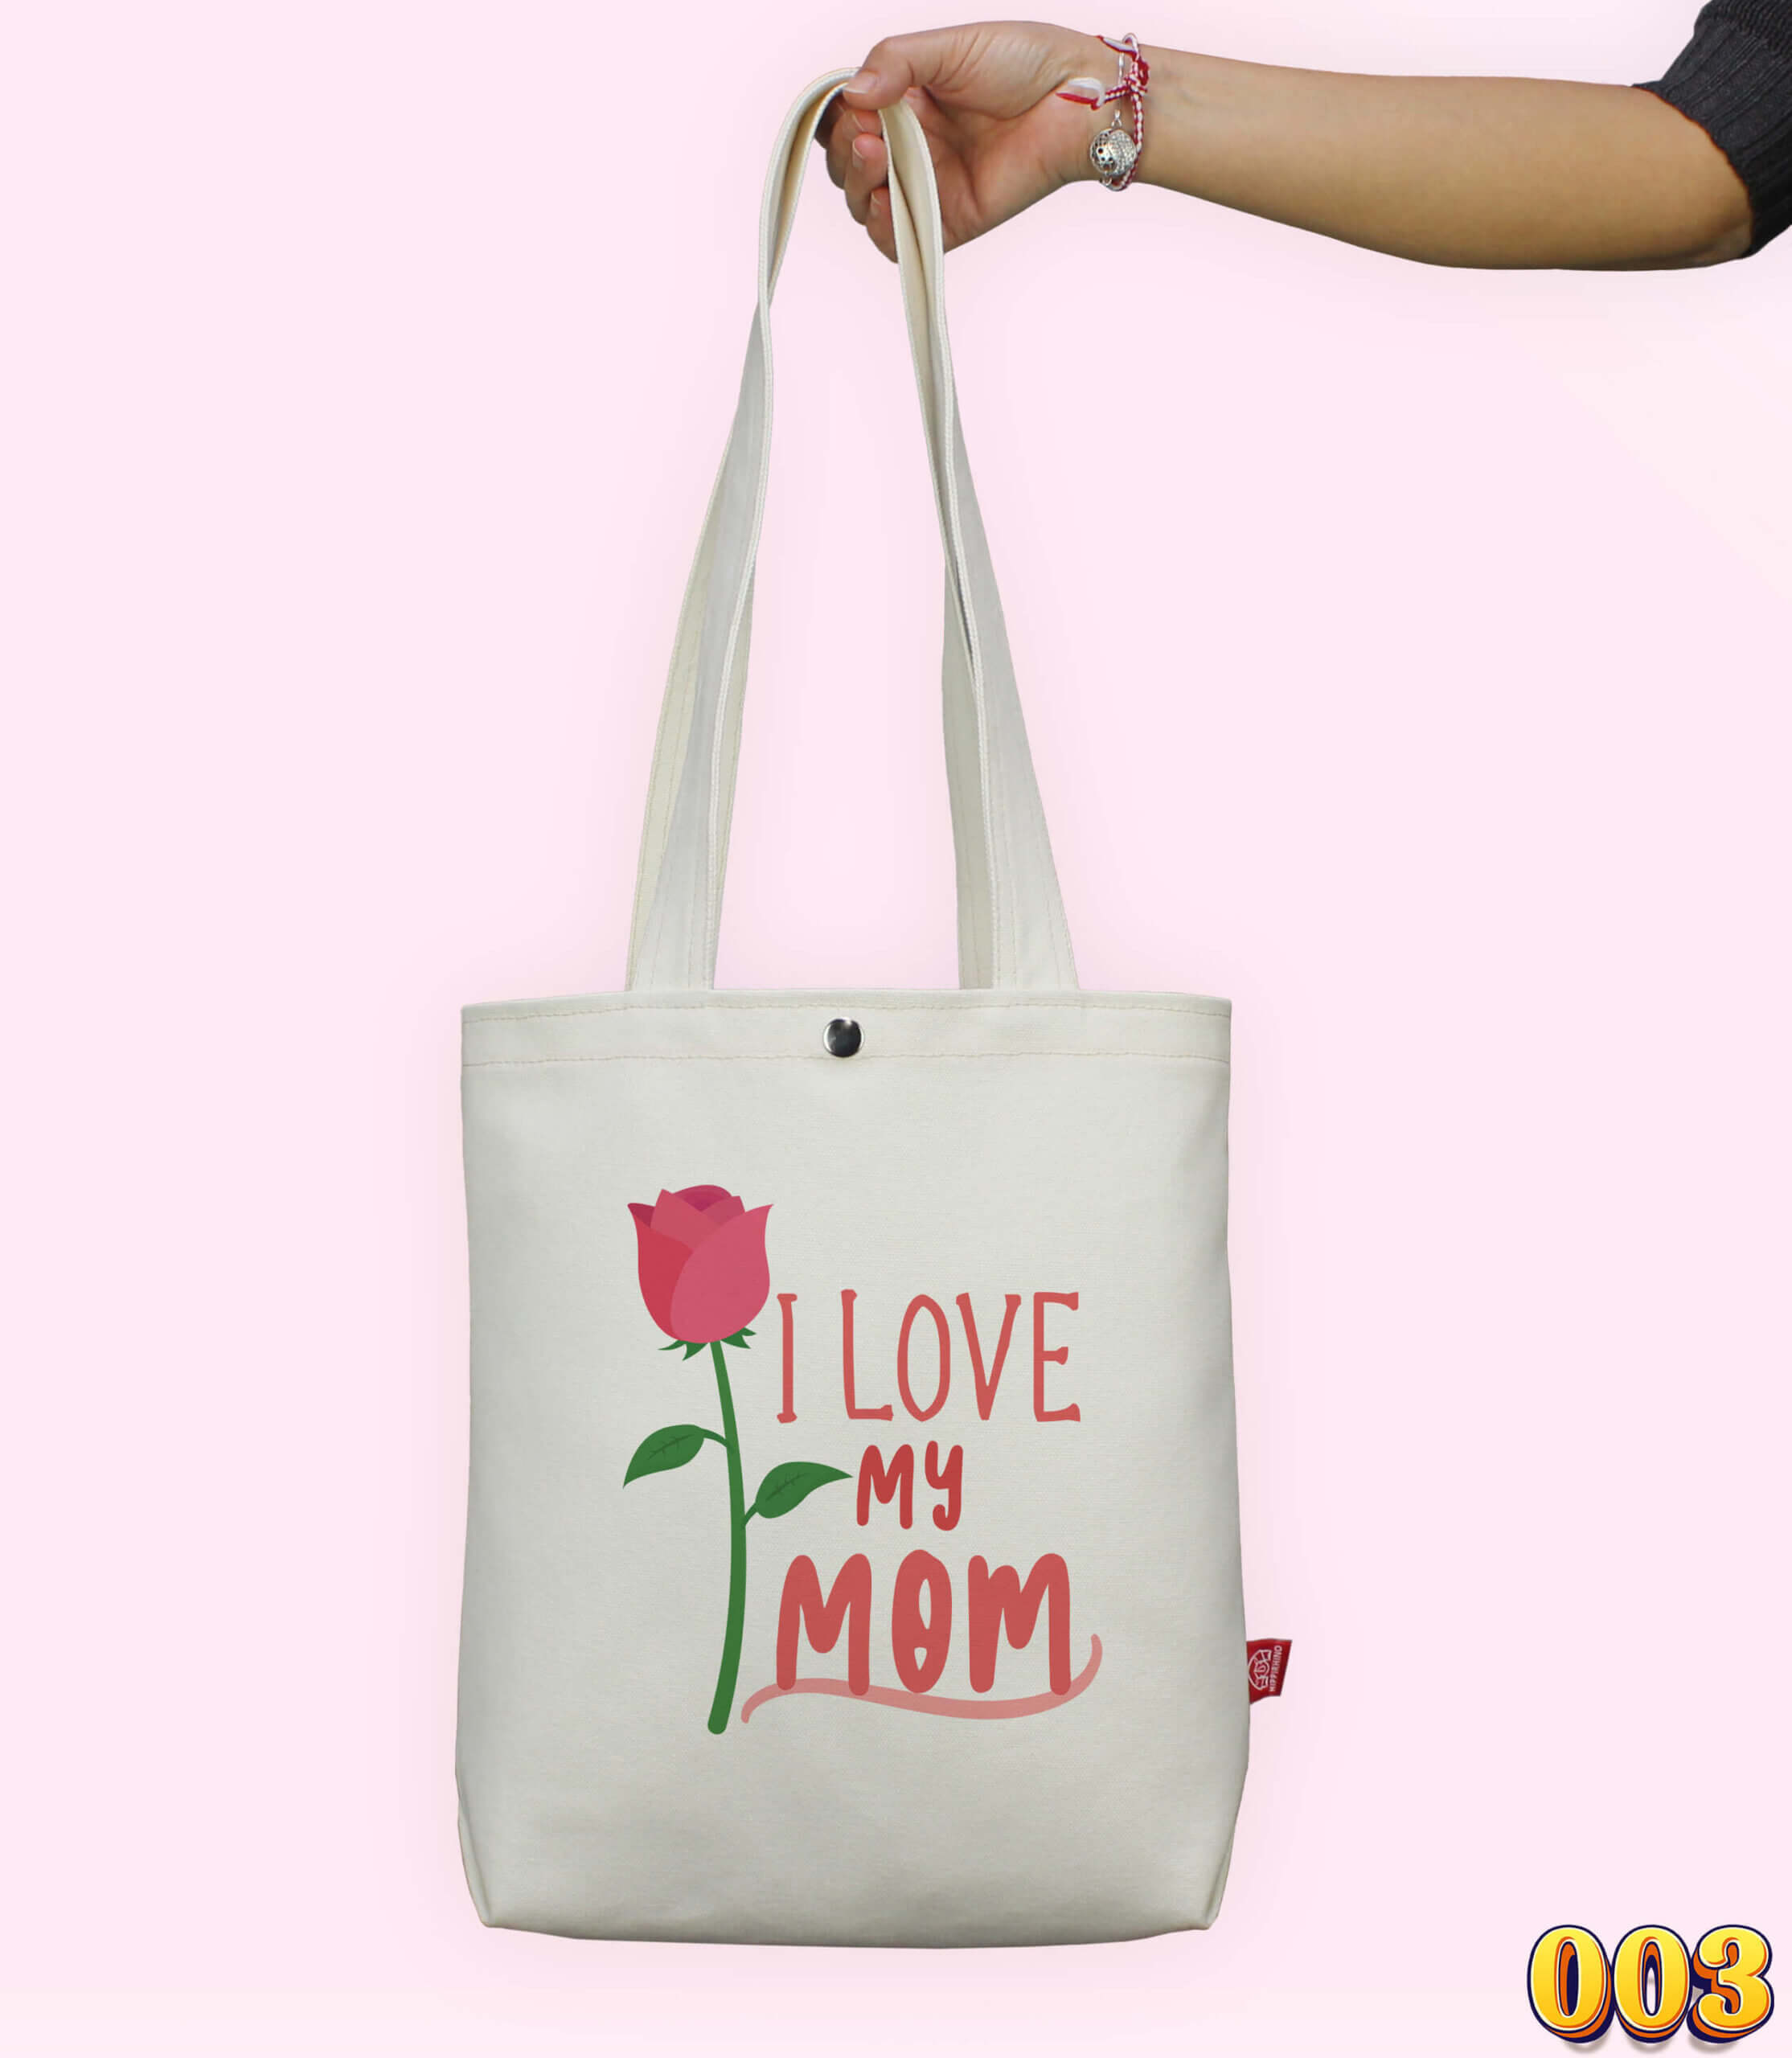 Personalized tote bag for women, Tote bags for mom, Reusable gift bags,  Mothers day gift for wife, Bonus mom gift, Eco friendly gift for her